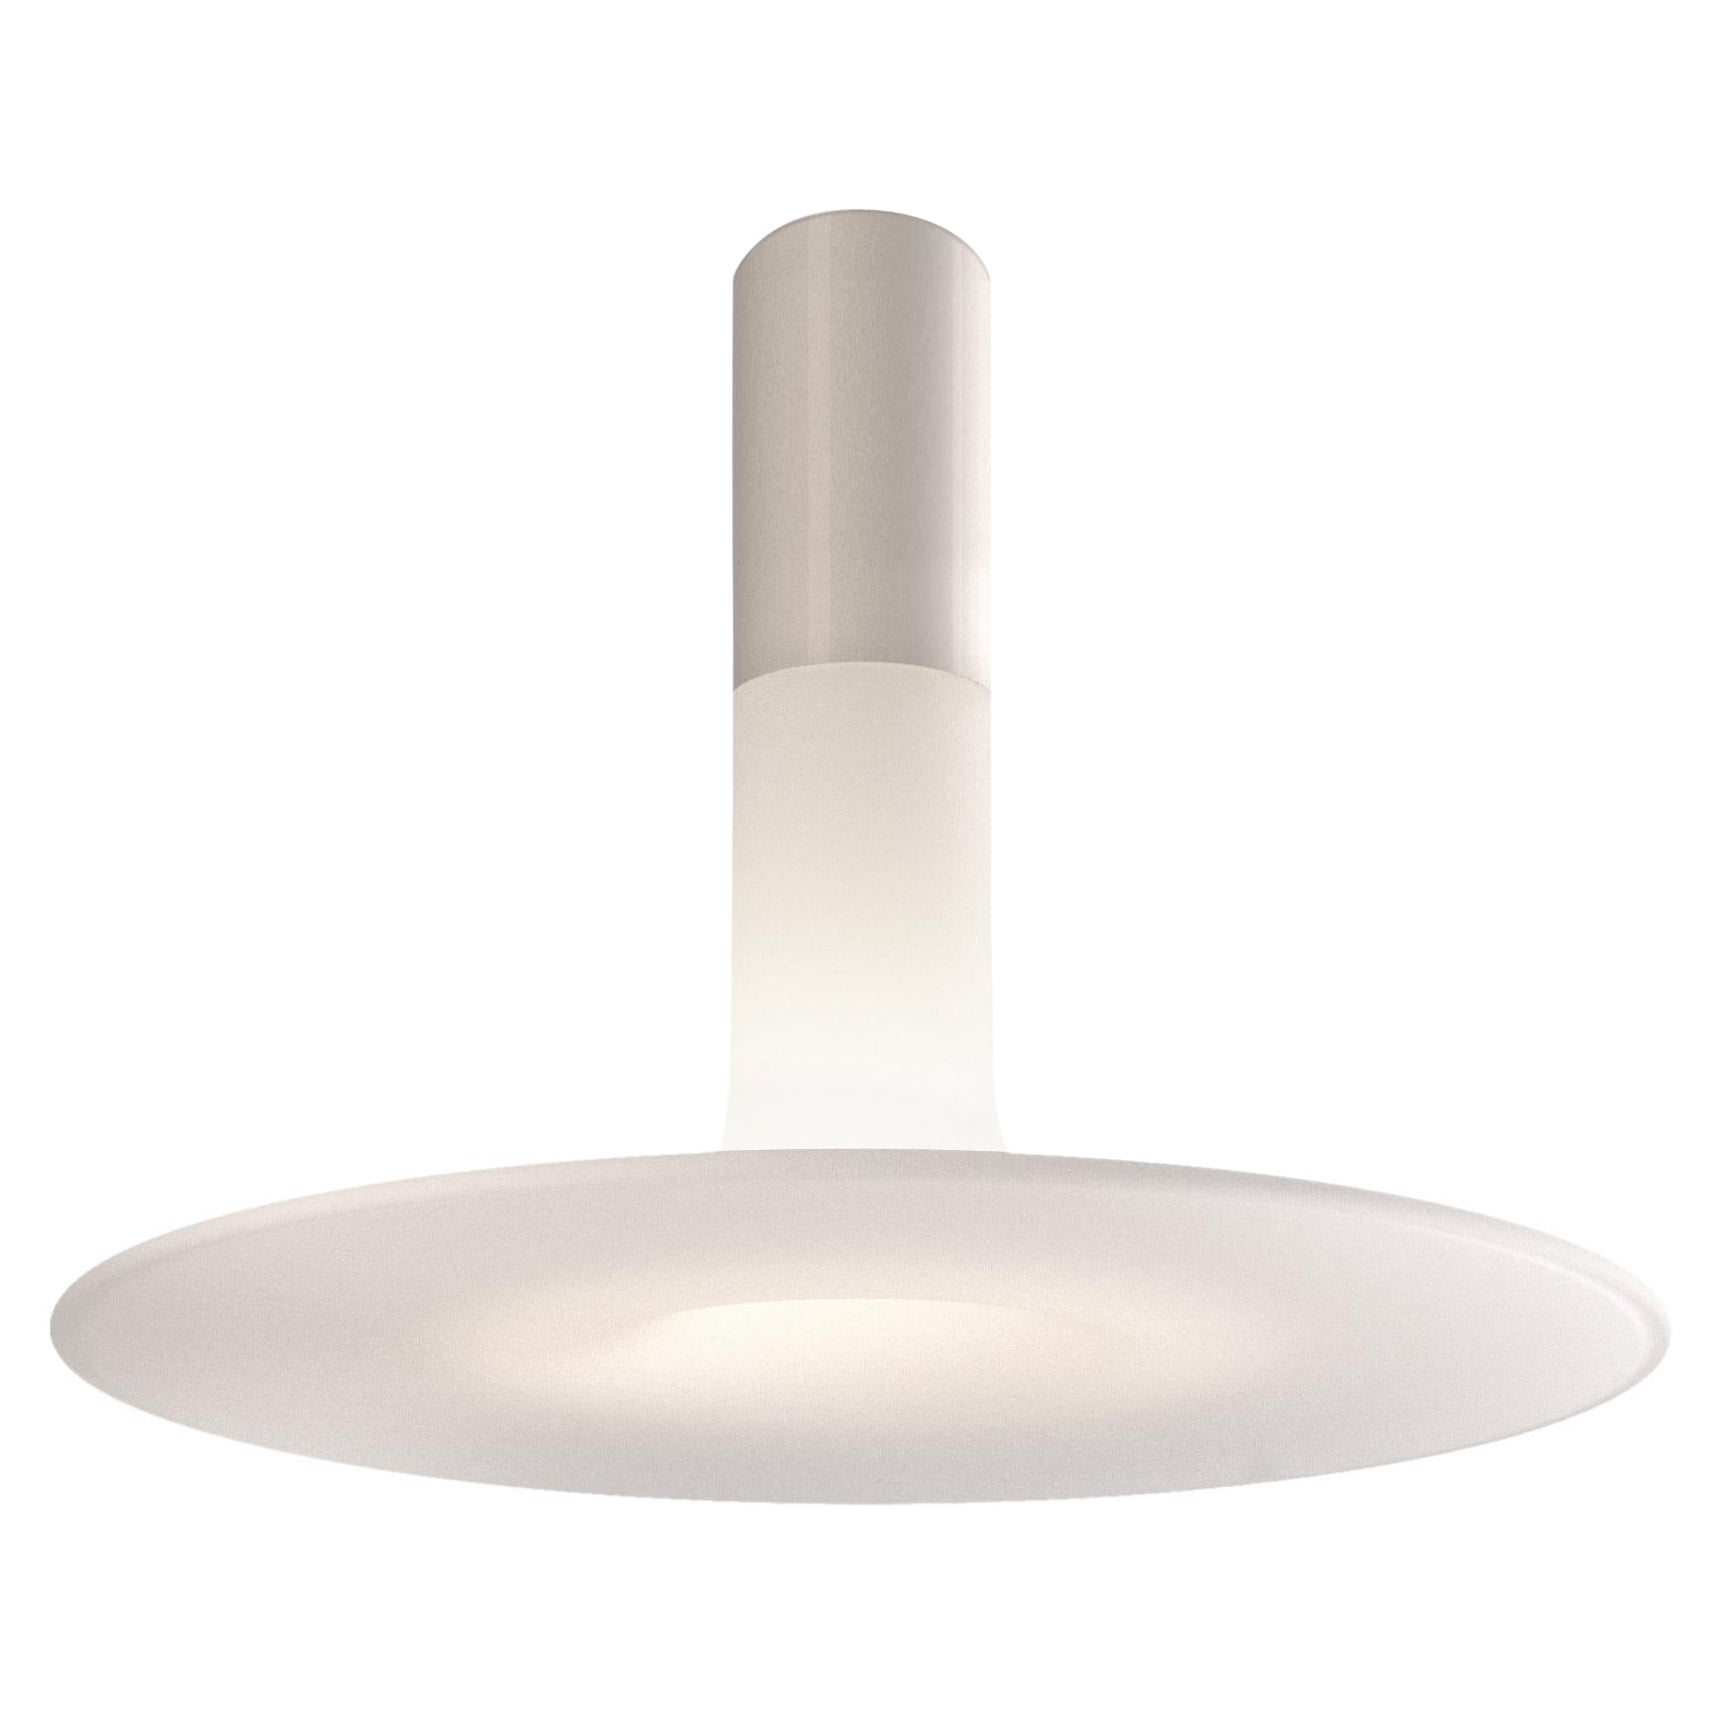 'Louis 41' Ceiling Lamp by Studio 14 for KDLN For Sale